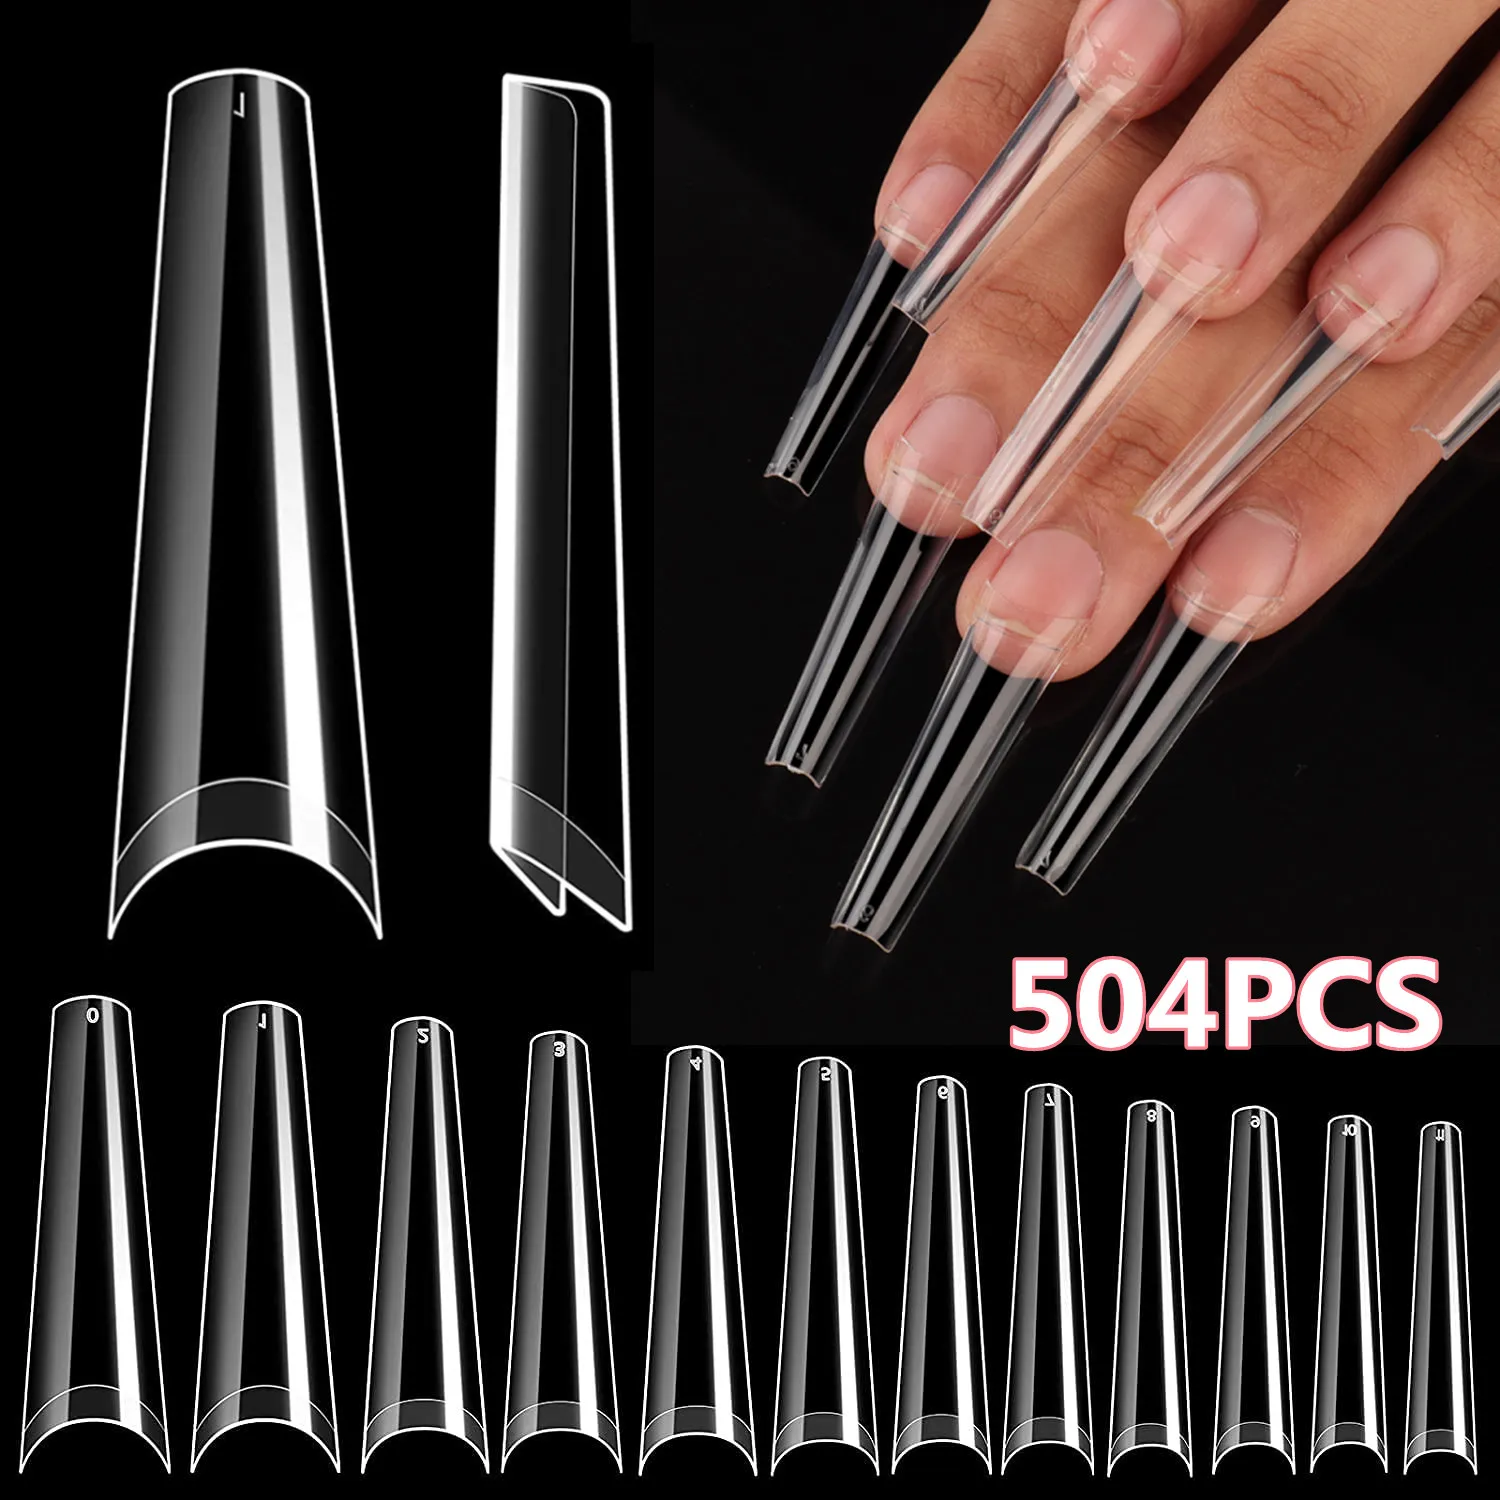 

Makartt Nail Tips 504PCS XXL Coffin French False Nails Half Cover Fake Press on Nails Supplies Acrylic Clear Soft Gel x Tips